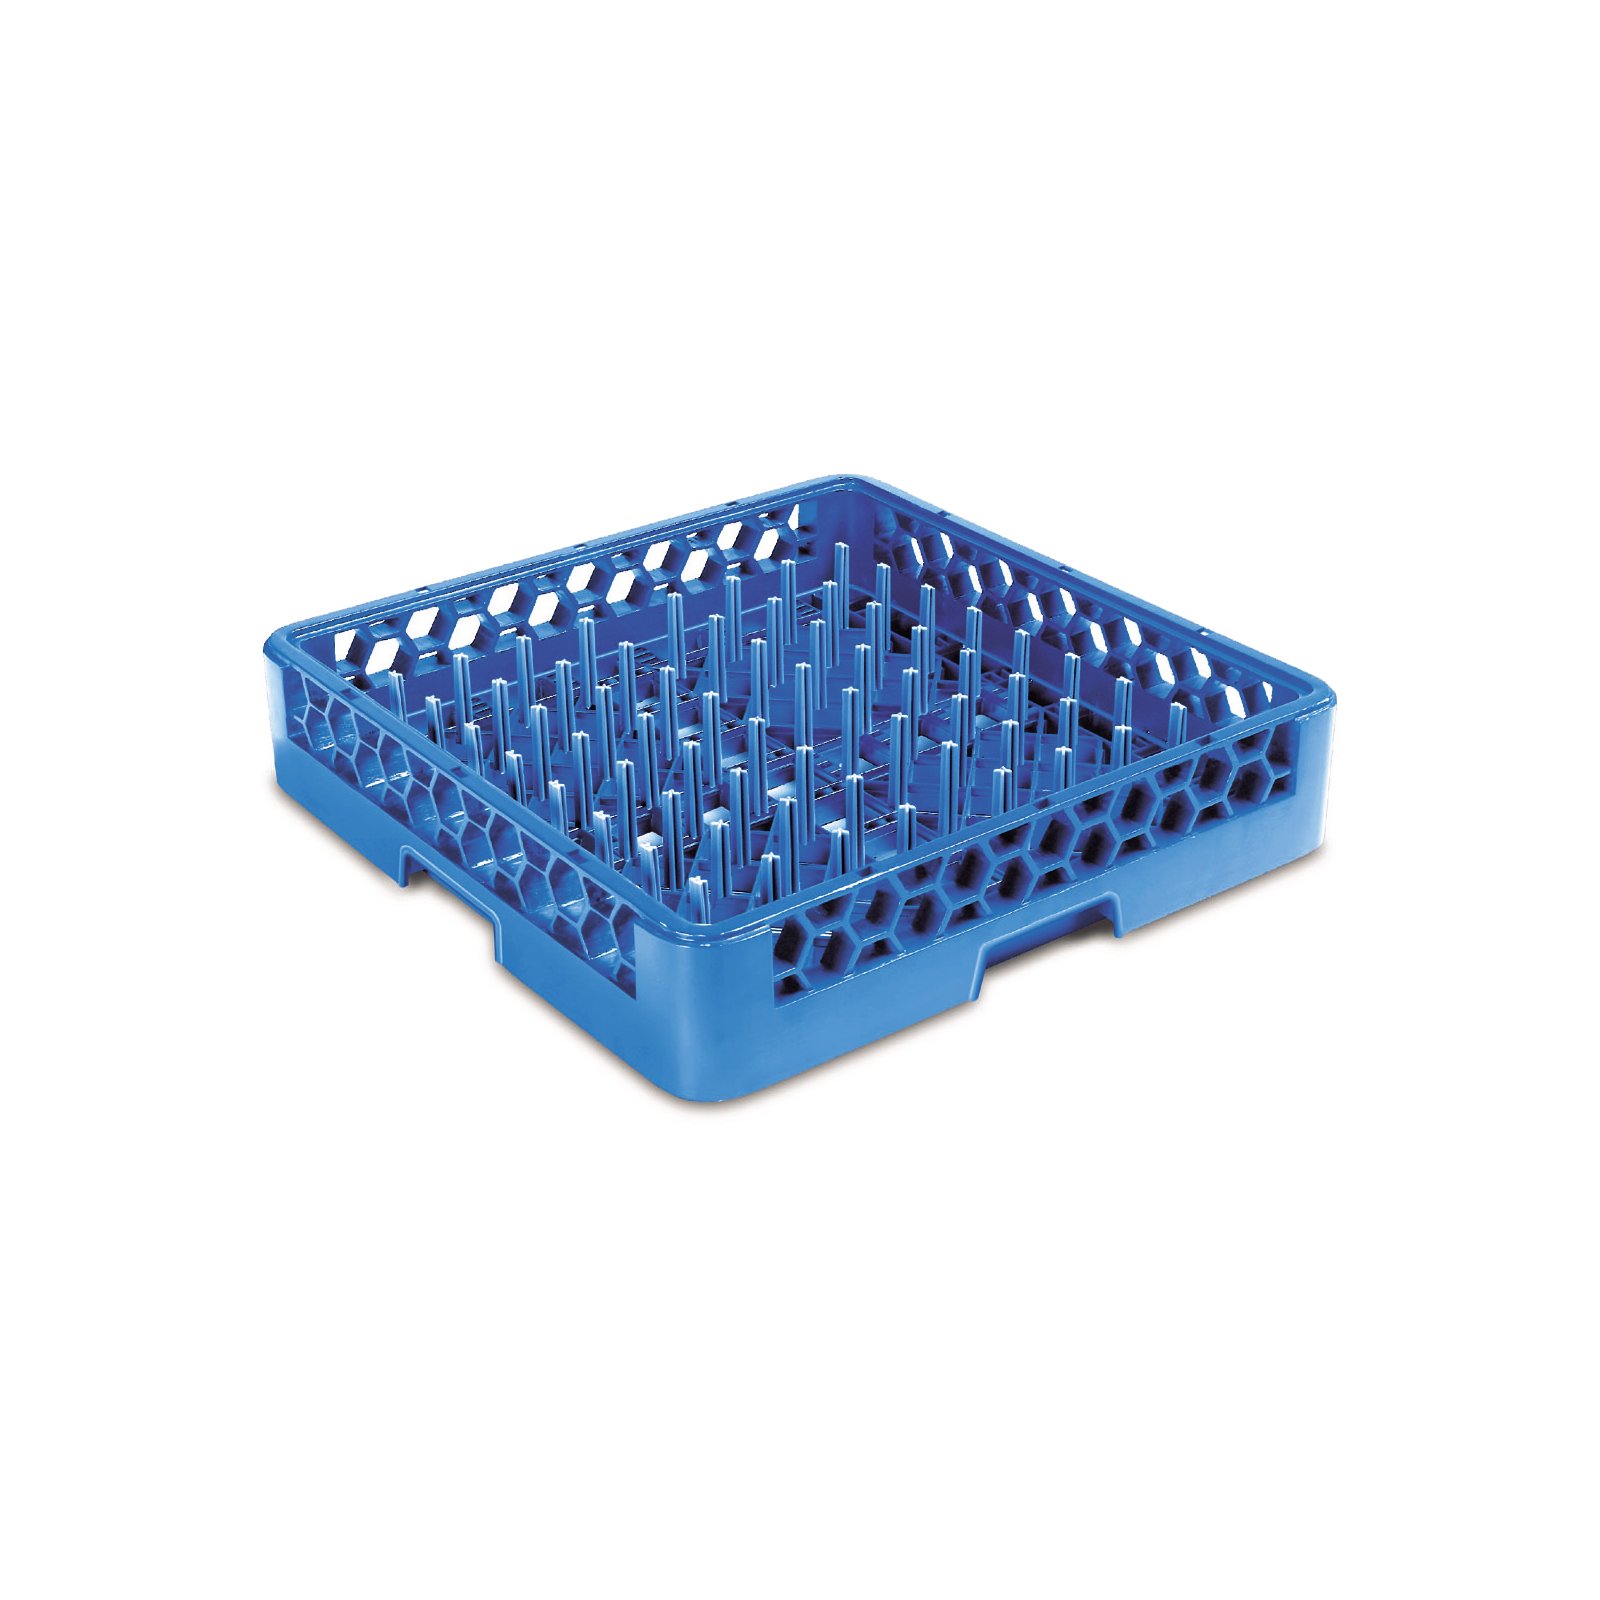 Carlisle FoodService Products OptiClean Peg Dish Rack for Commercial  Washing Machines, Tall Peg Plate Rack, Blue (Pack of 6)